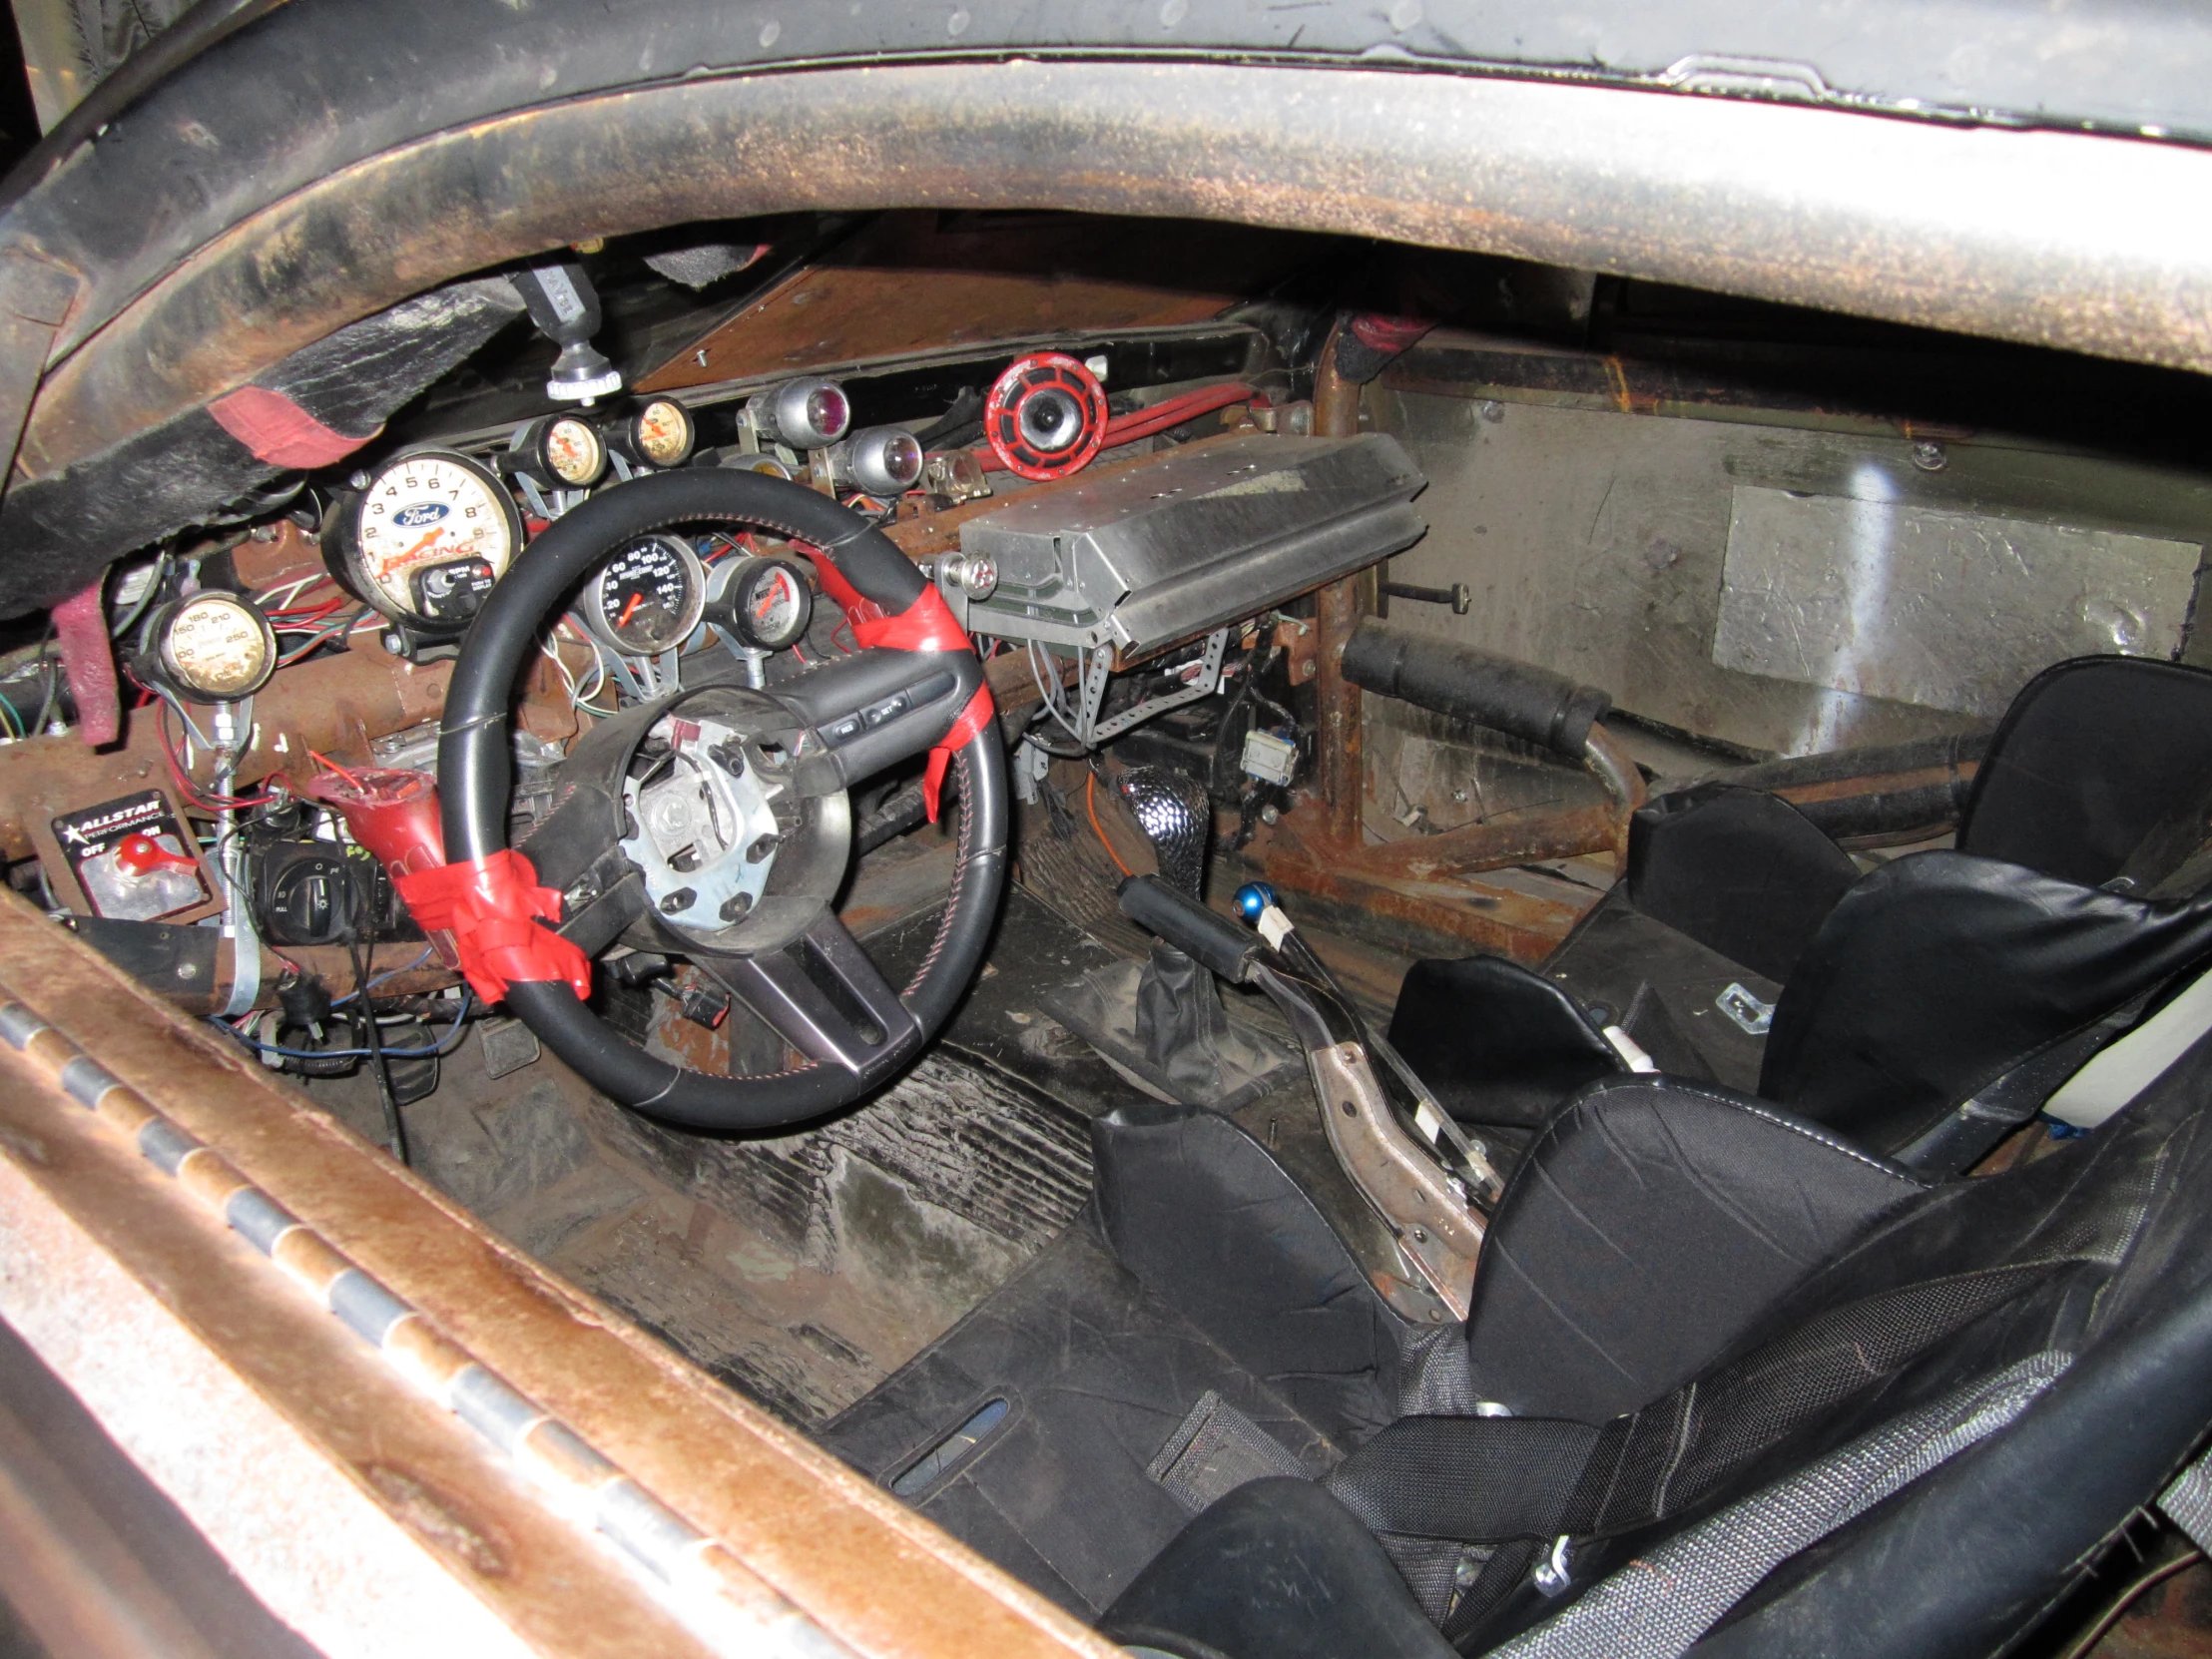 the dashboard in an old dirty car, showing its old parts and repair supplies